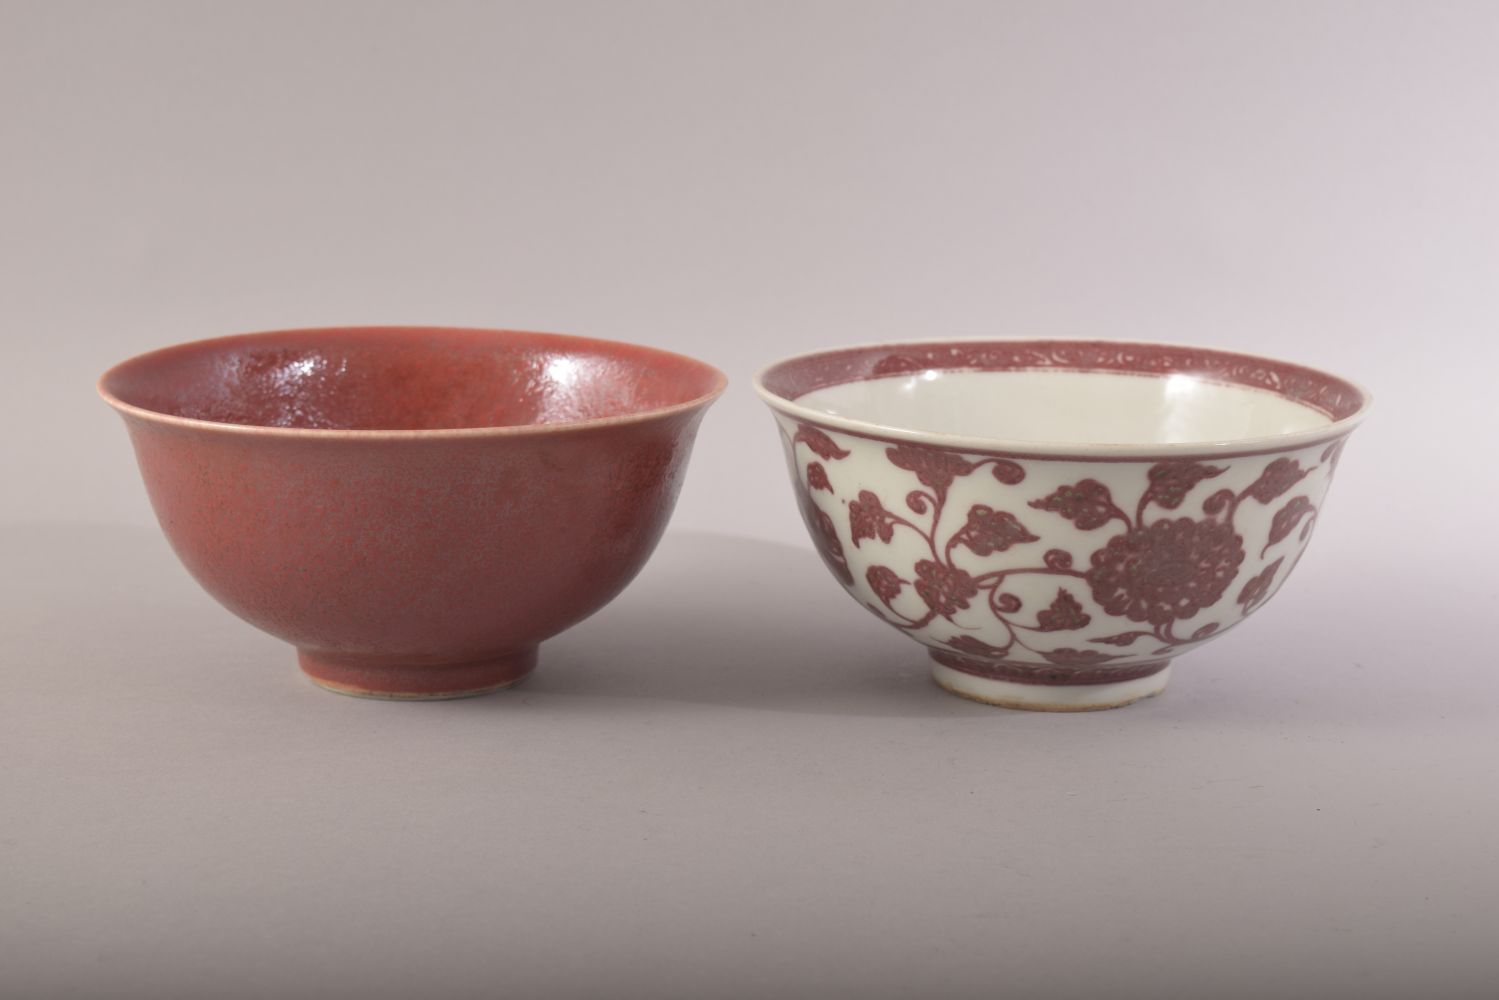 TWO CHINESE PORCELAIN BOWLS, one with red and white floral decoration, the other with red - Image 4 of 7